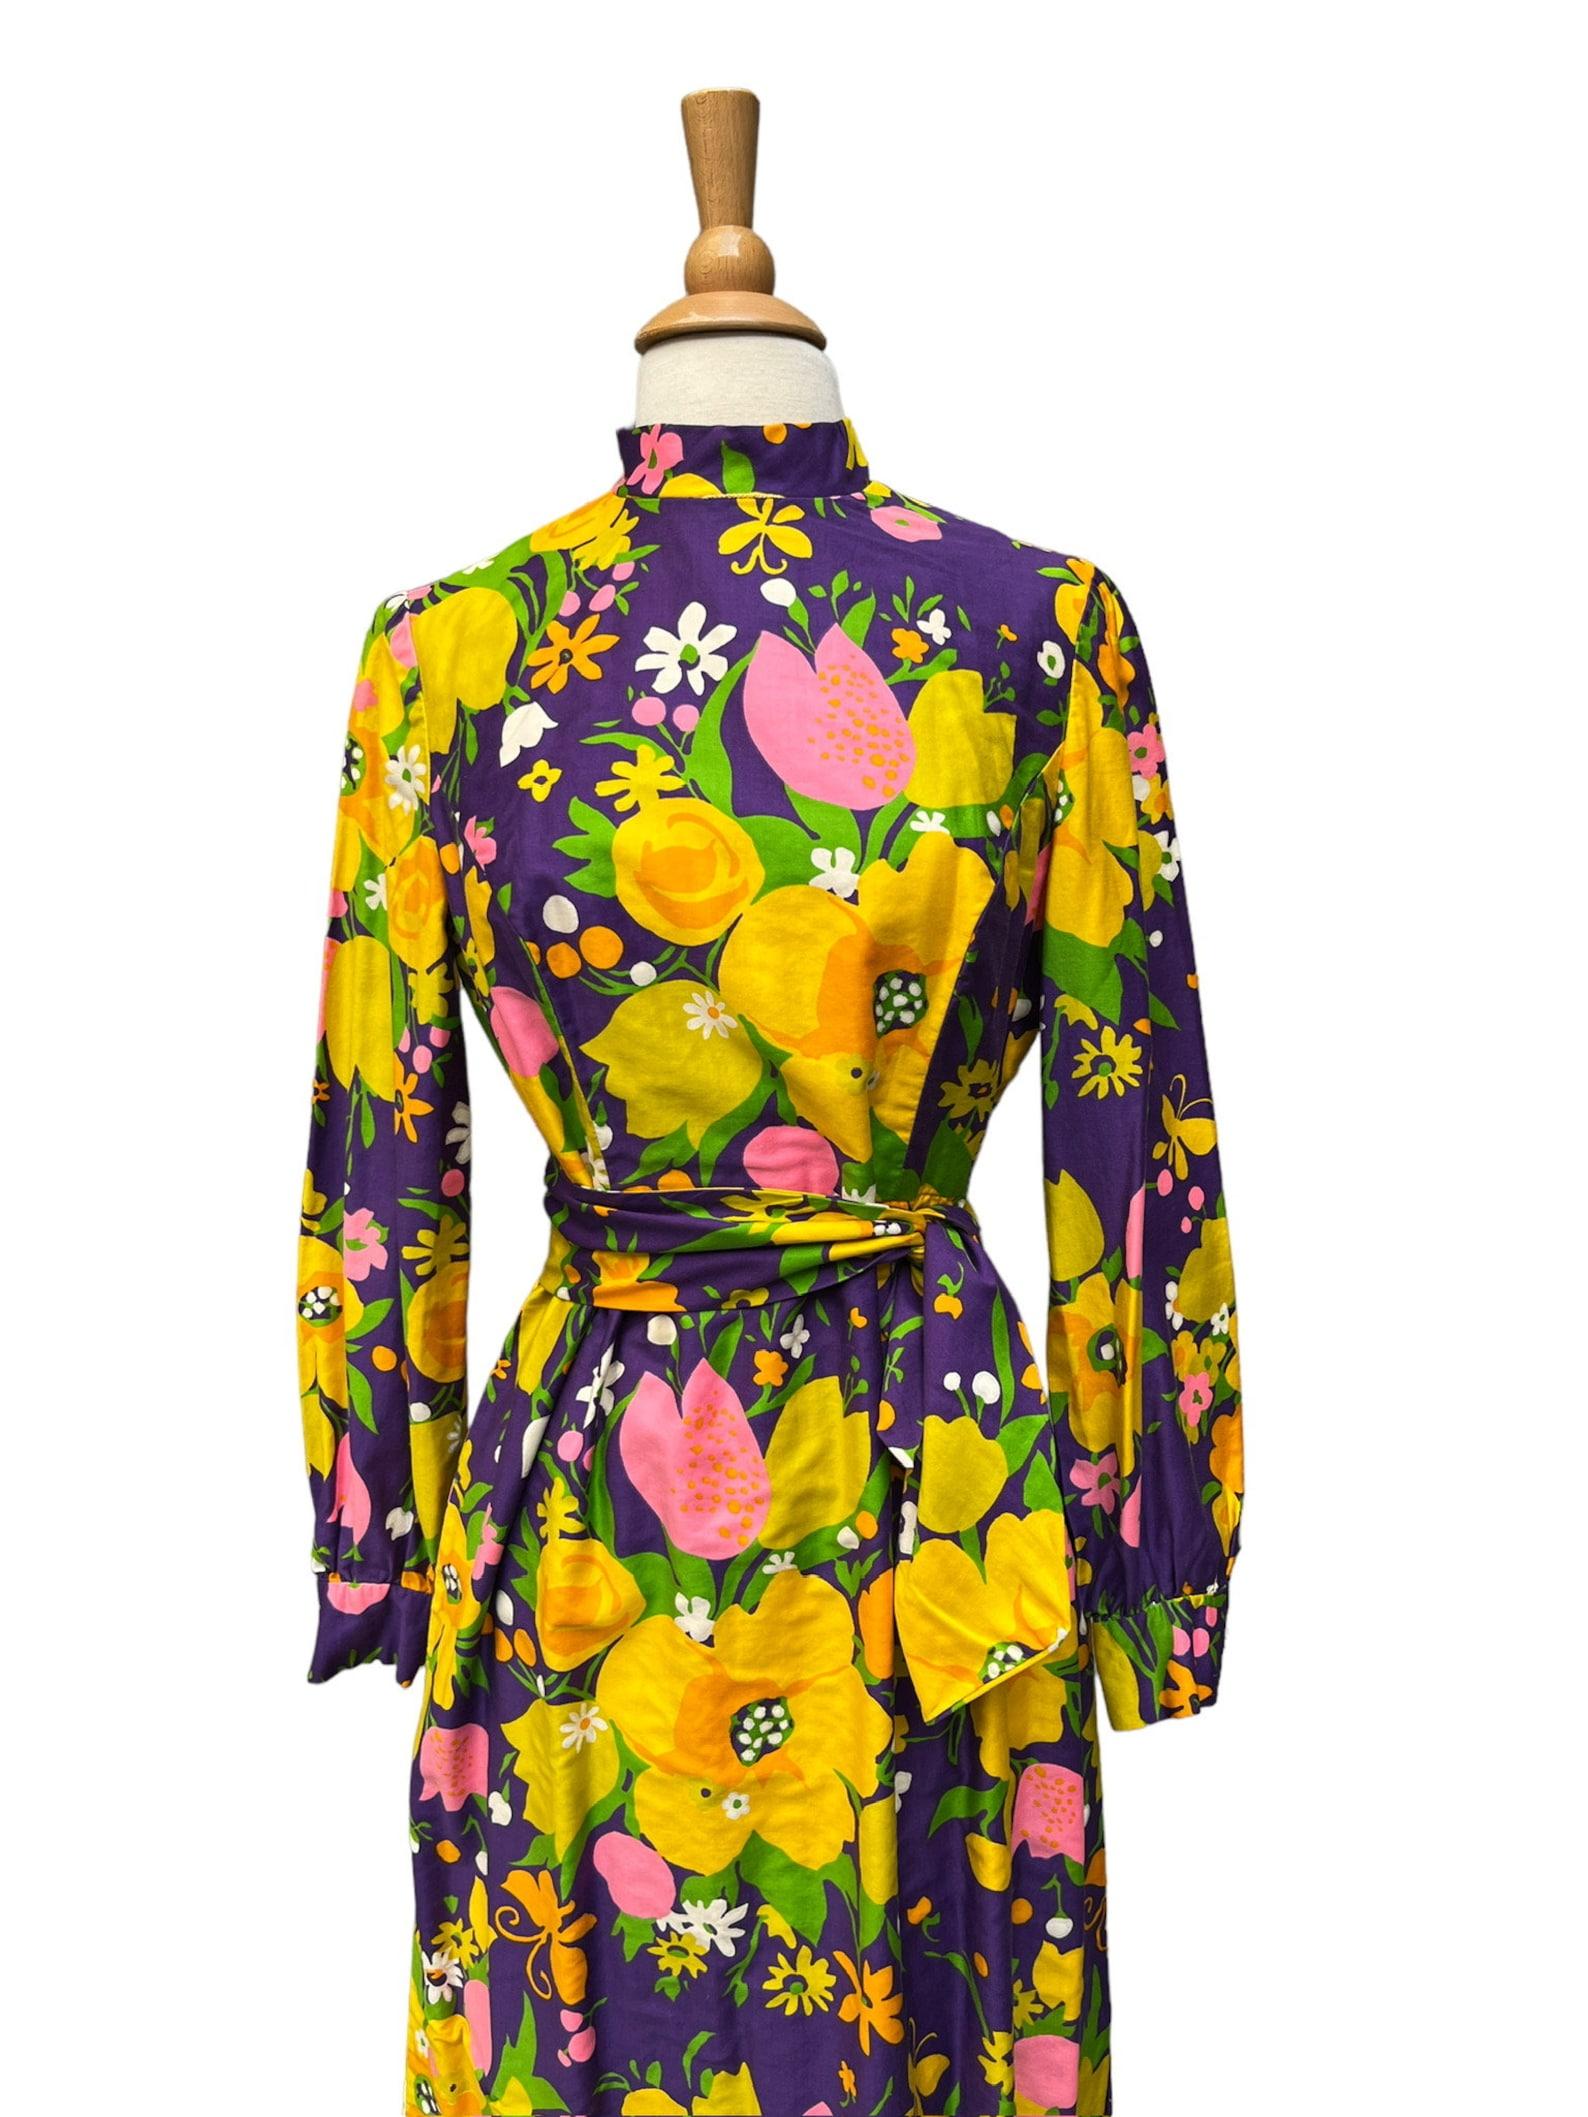 Brenner Couture maxi dress
large scale floral print
mock neck collar
long sleeves with button cuffs
matching self fabric belt
side slit hem on the left
back zip closure
has pockets
dress is lined
small yellow loop running along the collar so that